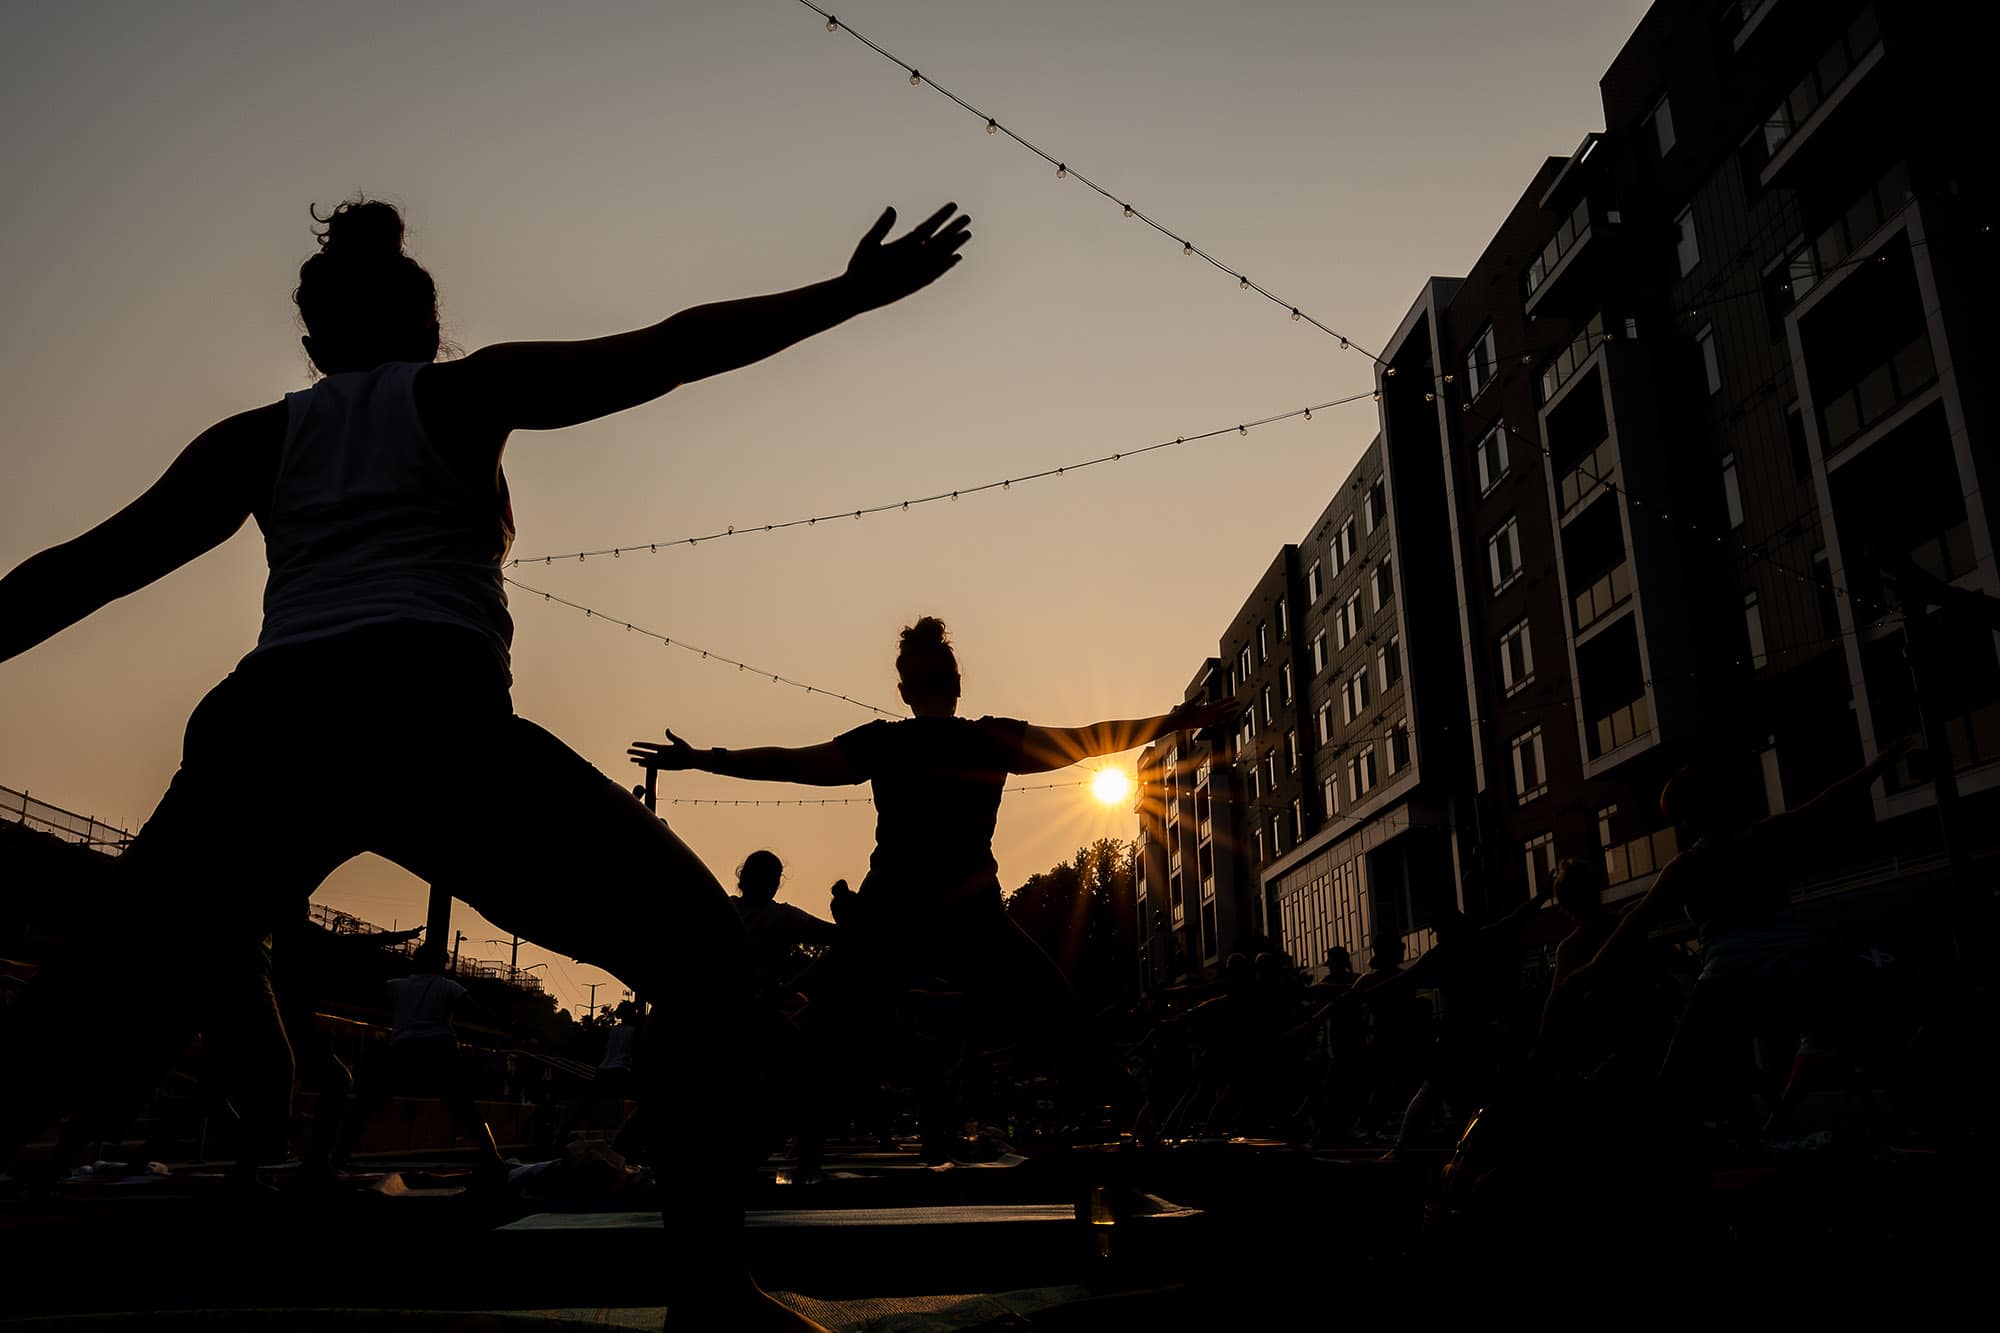 Yoga in the street at dusk